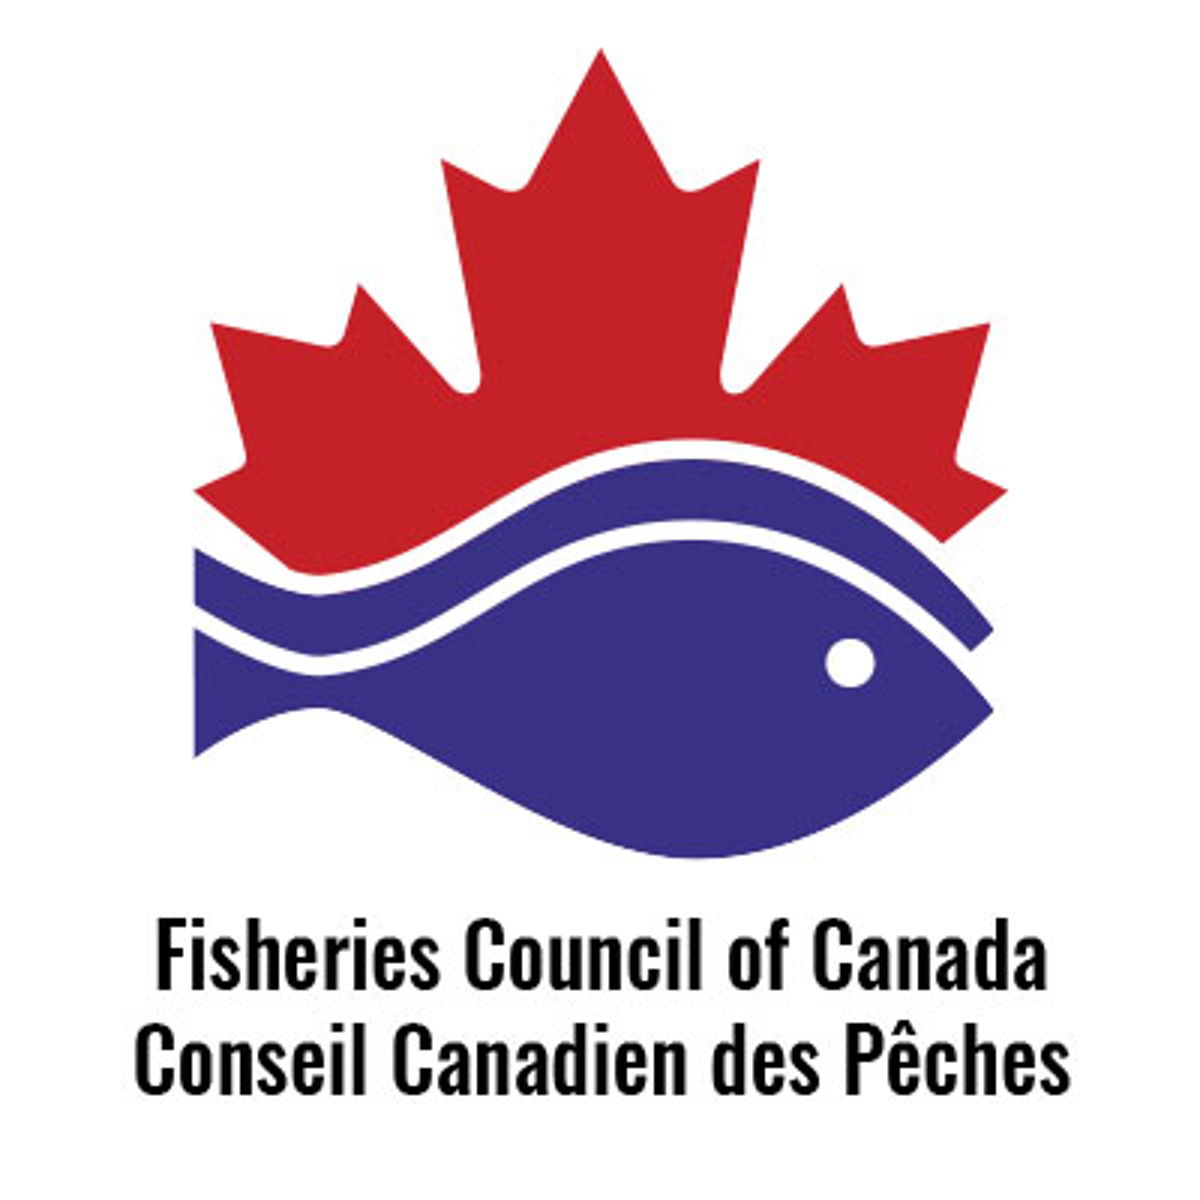 Fisheries Council of Canada Says Government Secrecy on New Fisheries Law Threatens Jobs, Investment